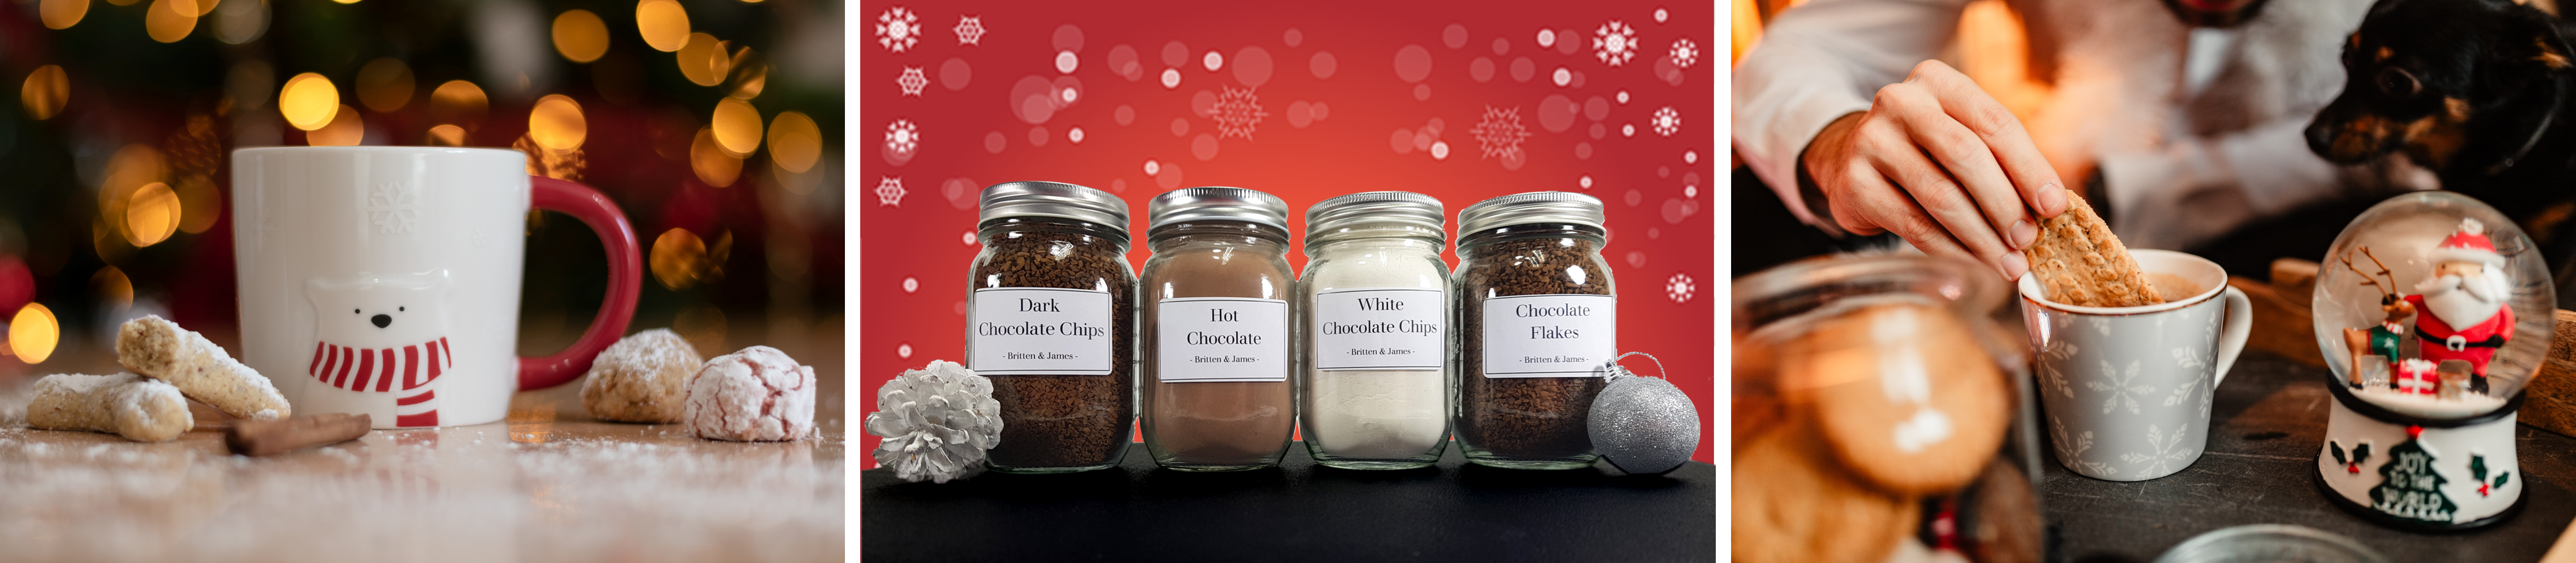 Jars for Hot Chocolate Stations